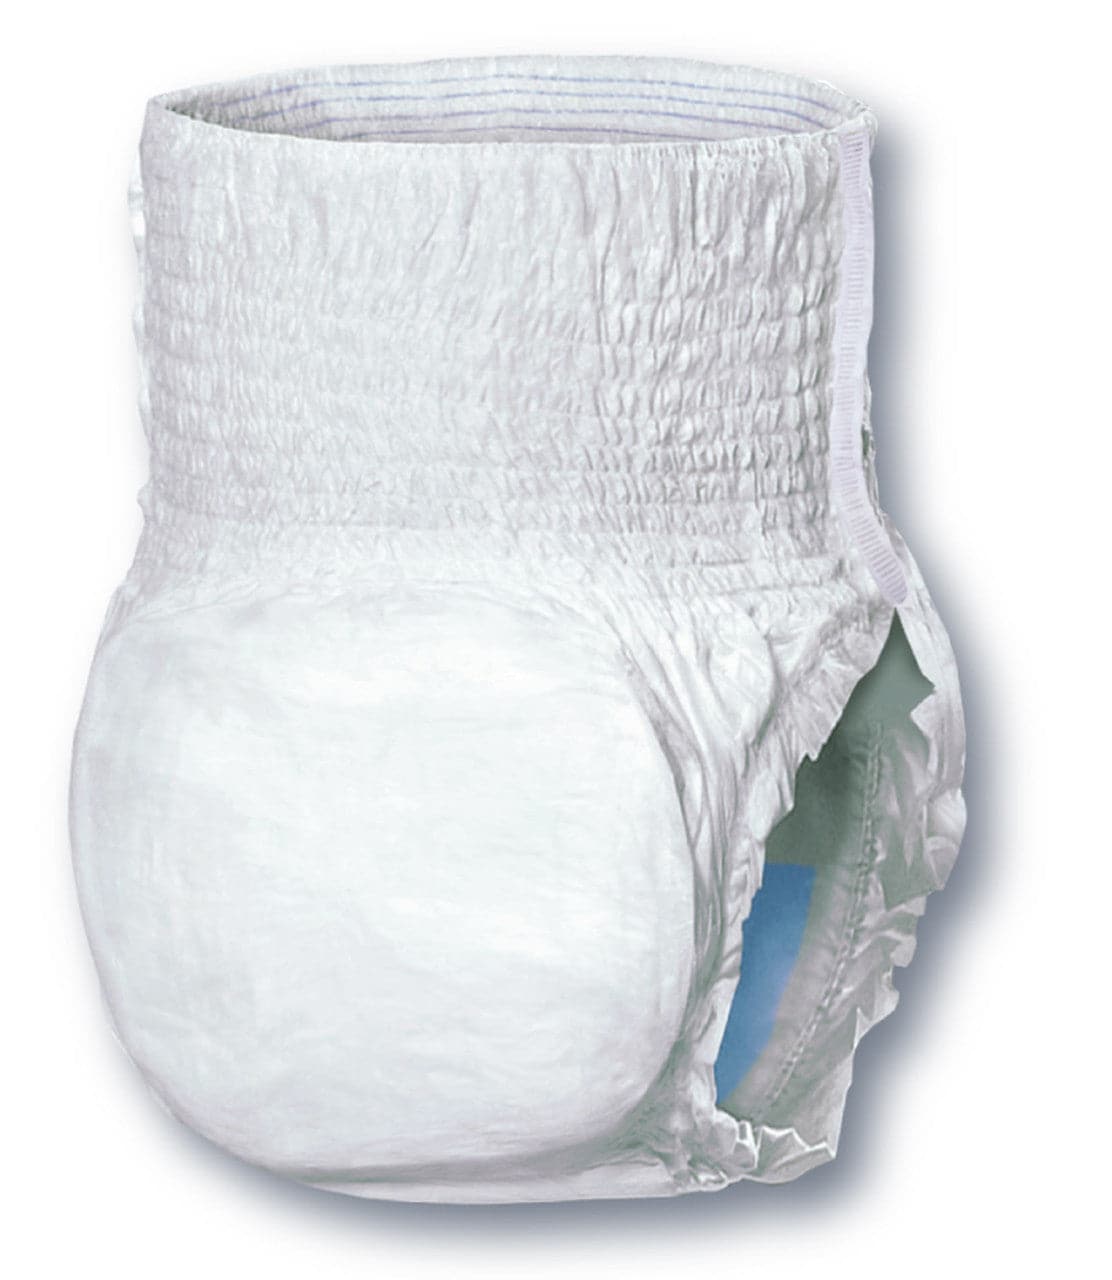 Forsite Health Maximum Absorbency Protective Underwear X-Large